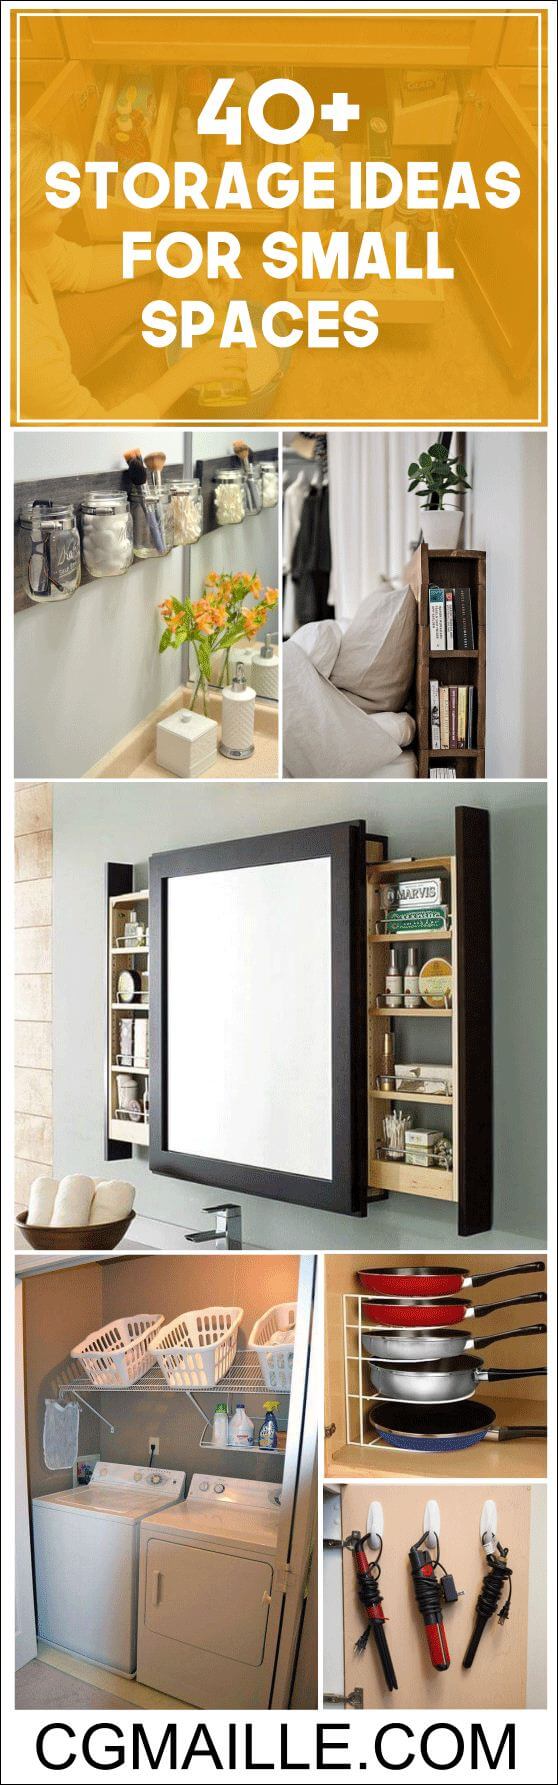 blanket storage ideas for small spaces